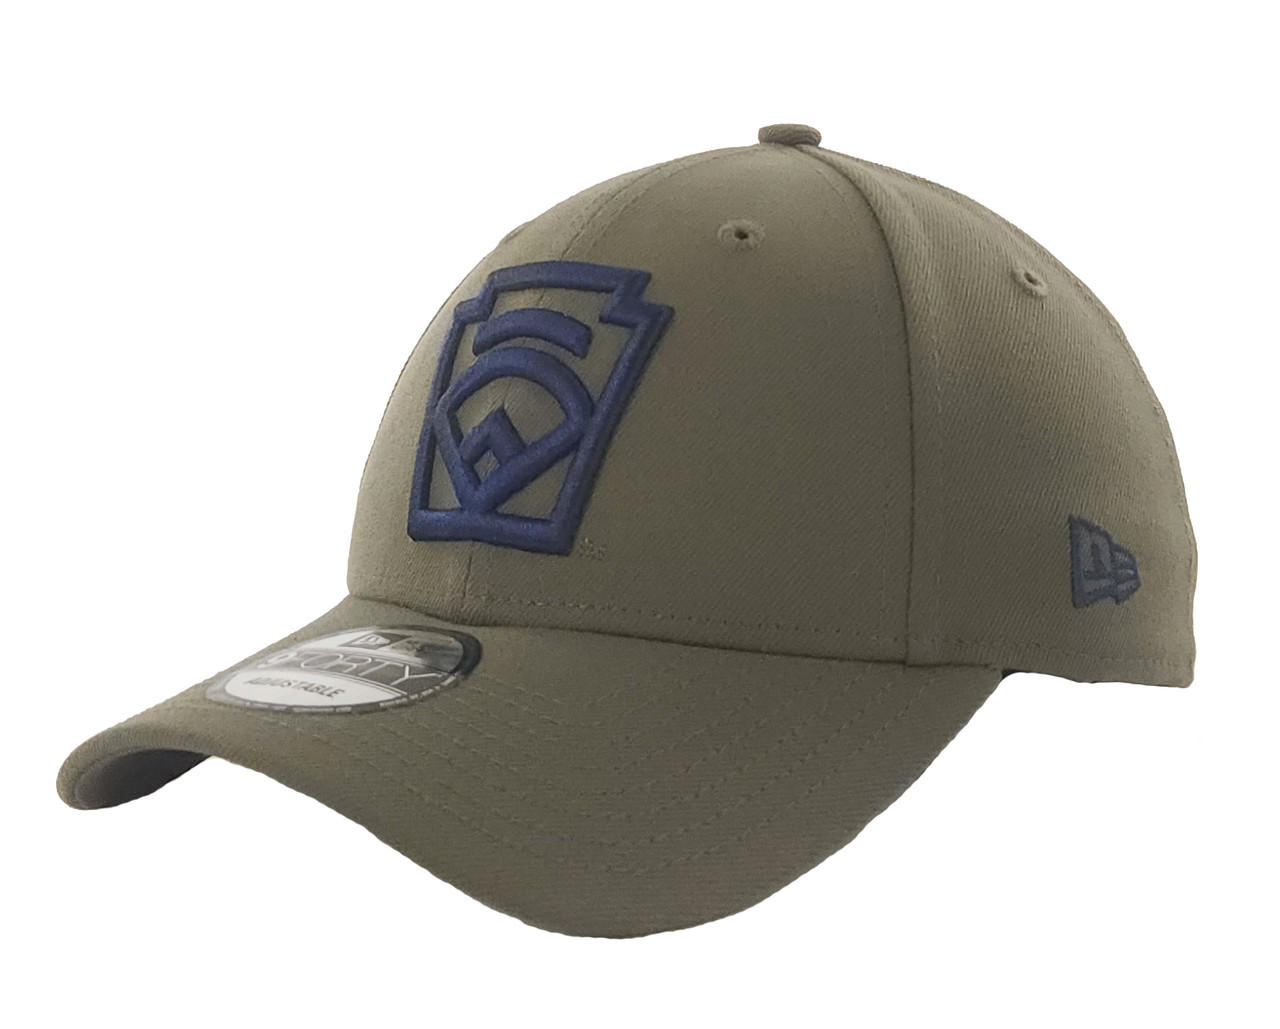 New Era San Diego Padres The League 9FORTY Navy Adjustable Hat